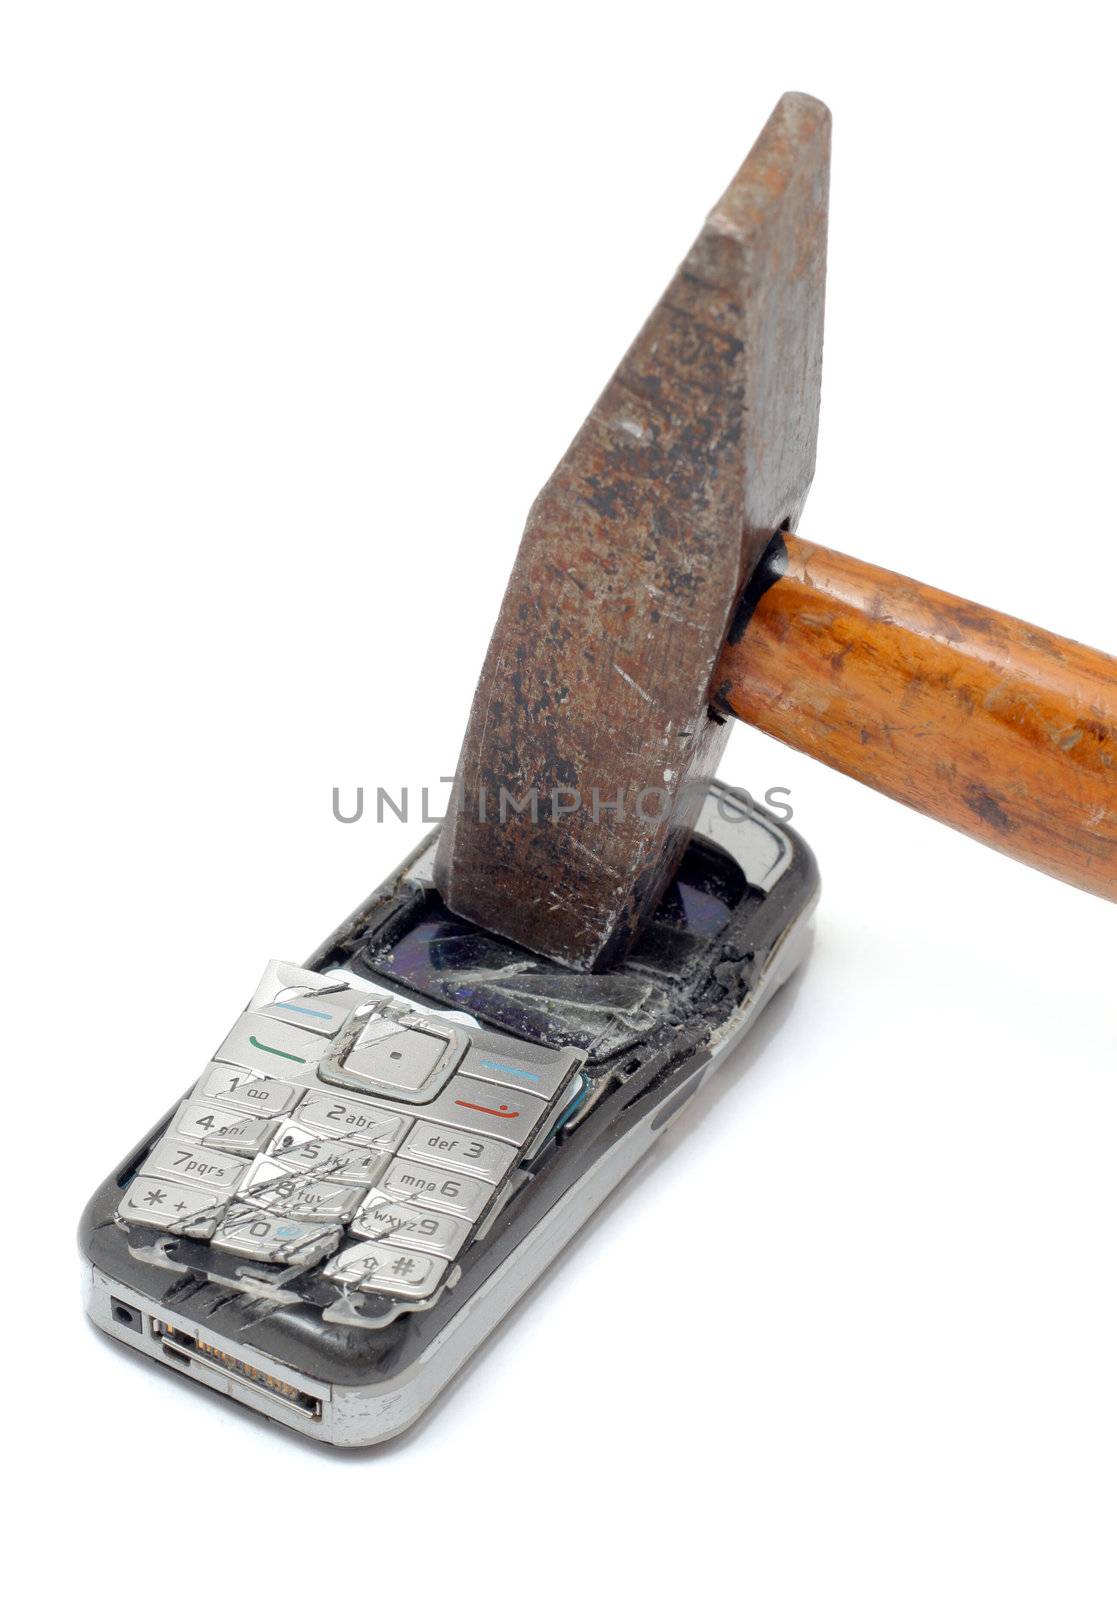 Smashed mobile phone by remik44992